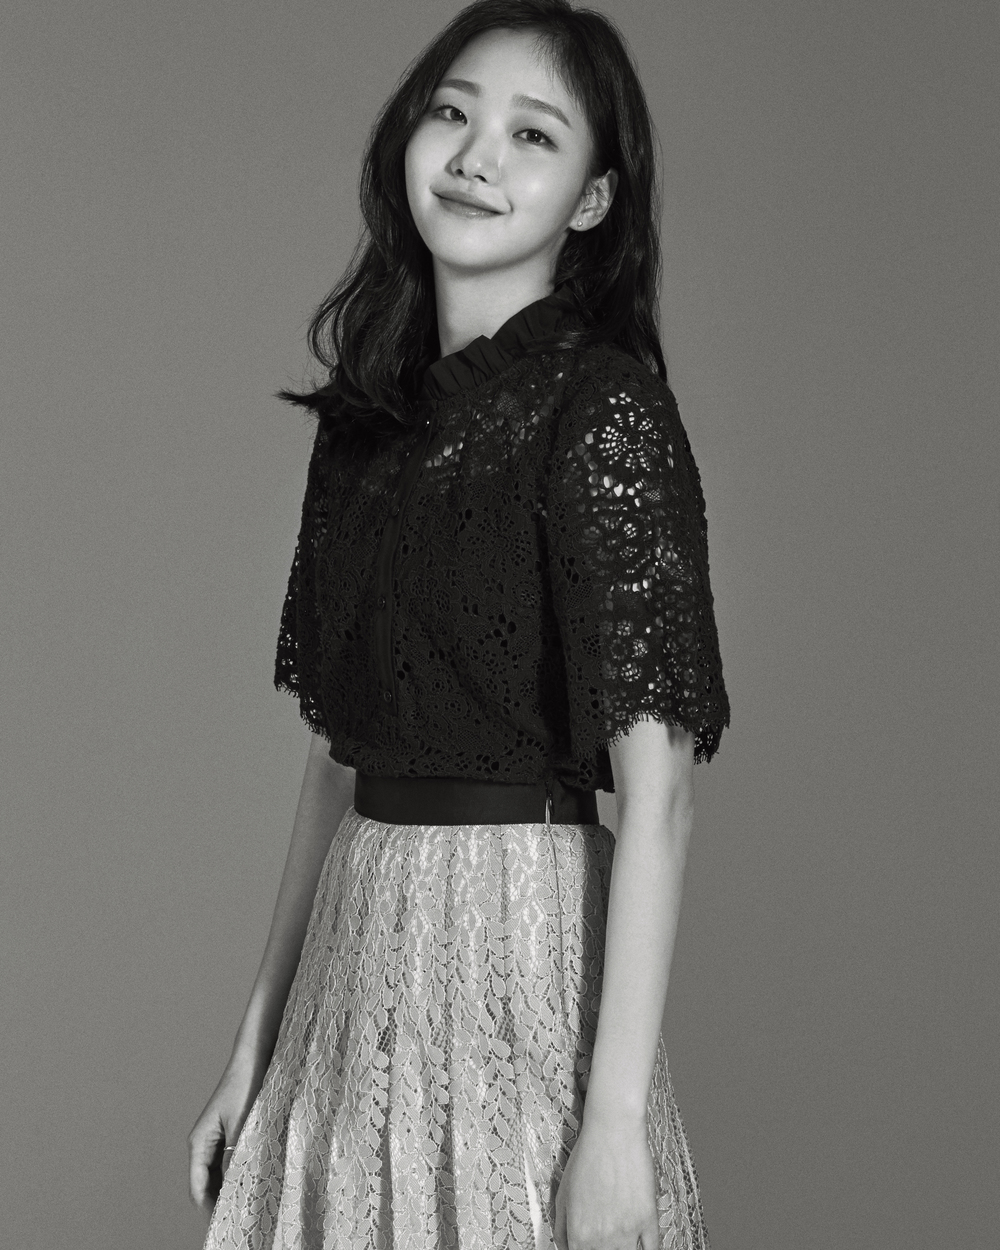 After he appeared in the film industry as a clunky girl A Muse, modifiers such as second Kim Go-eun and second A Muse came up.Kim Go-eun asked, laughing, Can you stop writing that? There was a lot of consideration for fellow Actors in addition to humility.Those who were called second Kim Go-eun are Kim Tae-ri, who made his debut as girl, burning Jeon Jong-seo, and Kim Dae-mi, the main character of the recently released movie Witch.Kim Go-eun, who said, Girls and burning were fun but Witch is so new that I have not seen it yet, said, Everyone is really great.I want to do it, he said. But I hope that the second Kim Go-eun modifier will stop. I am so ashamed. Nevertheless, the presence of Kim Go-eun in A Muse was great, and the afterimage remains for so long.Kim Go-eun said: When I was a year old, I shot A Muse - when there are many parts I havent experienced yet.There was gratitude for starting work as a lead, but also responsibility and burden: how long would a twenty-year-old have had a Spectrum for acting?I thought I wanted to expand myself a little more by experiencing a lot in a short period of time while shooting A Muse. Since then, Kim Go-eun has been involved in various characters and characters such as movies Memory of Knife, Carl, Chinatown and Angered Lawyer, and TVN drama Dokkaebi has been reborn as a Korean Wave star.When Choices was working, co-working with his seniors was very important, he said, I had to appear in a work that was scary to do, to broaden the spectrum.It may have seemed ignorant, but Choices work in a direction that can develop rather than I do well seems to have helped in many ways now.The comfortable side was not Choices, he said.At least, the current performance spectrum has not been wider than the A Muse, he said. I am worried about what is a professional these days.I felt like I made my debut when I was a child and had a lot of trial and error, so I am worried about what kind of pro is. There is no pressure on A Muse that follows like a tag: Kim Go-eun has always been asked if he wants to erase A Muse.But A Muse is my first work and representative work. It is a glorious thing to have a representative work. However, he added, Of course, if I feel A Muse in all my images, I will not be able to go well, but I am grateful that there is A Muse among the many things that modify me.Meanwhile, the movie Sunset in My Hometown (director Lee Jun-ik), which is about to be released on July 4, is a delightful drama depicting the biggest crisis of the life of a schoolboy, Park Jung-min, who was forced to be summoned to his hometown Sunset in My Hometown, full of black history, with the tricks of unrequited love Sunmi (Kim Go-eun).Kim Go-eun is the man who forced the unknown rapper Committee Academic (Park Jung-min) to summon his hometown Sunset in My Hometown to make life twisty, and plays the role of the committee Sunmi which inspires the vitality of the drama with its unstoppable stone fastball.pear hyo-ju